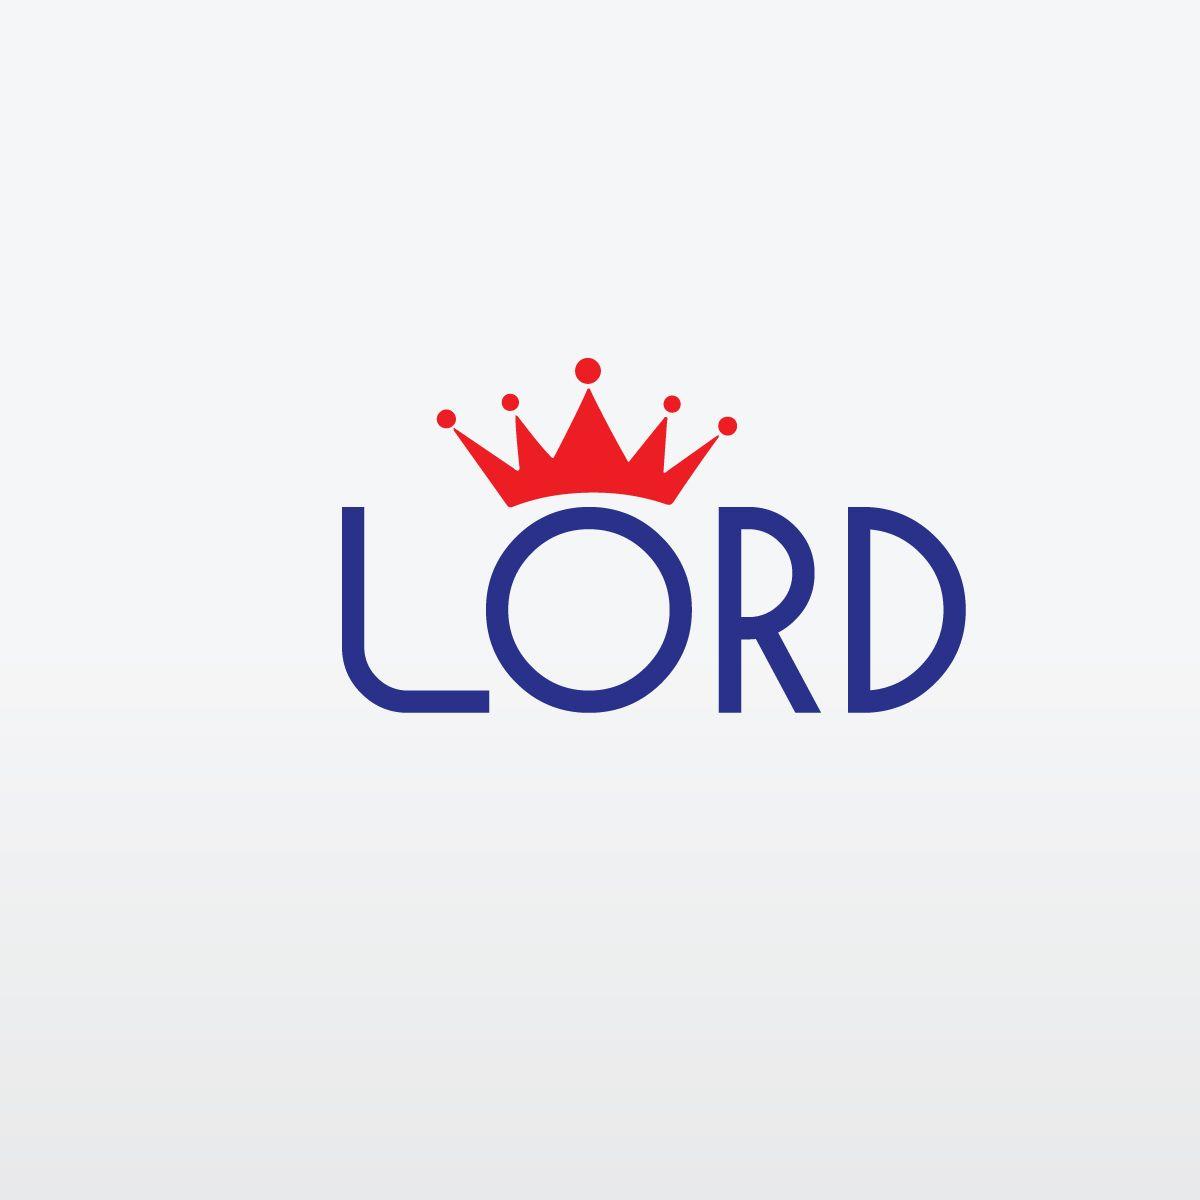 Lord Logo - Upmarket, Playful, Electrical Logo Design for LORD